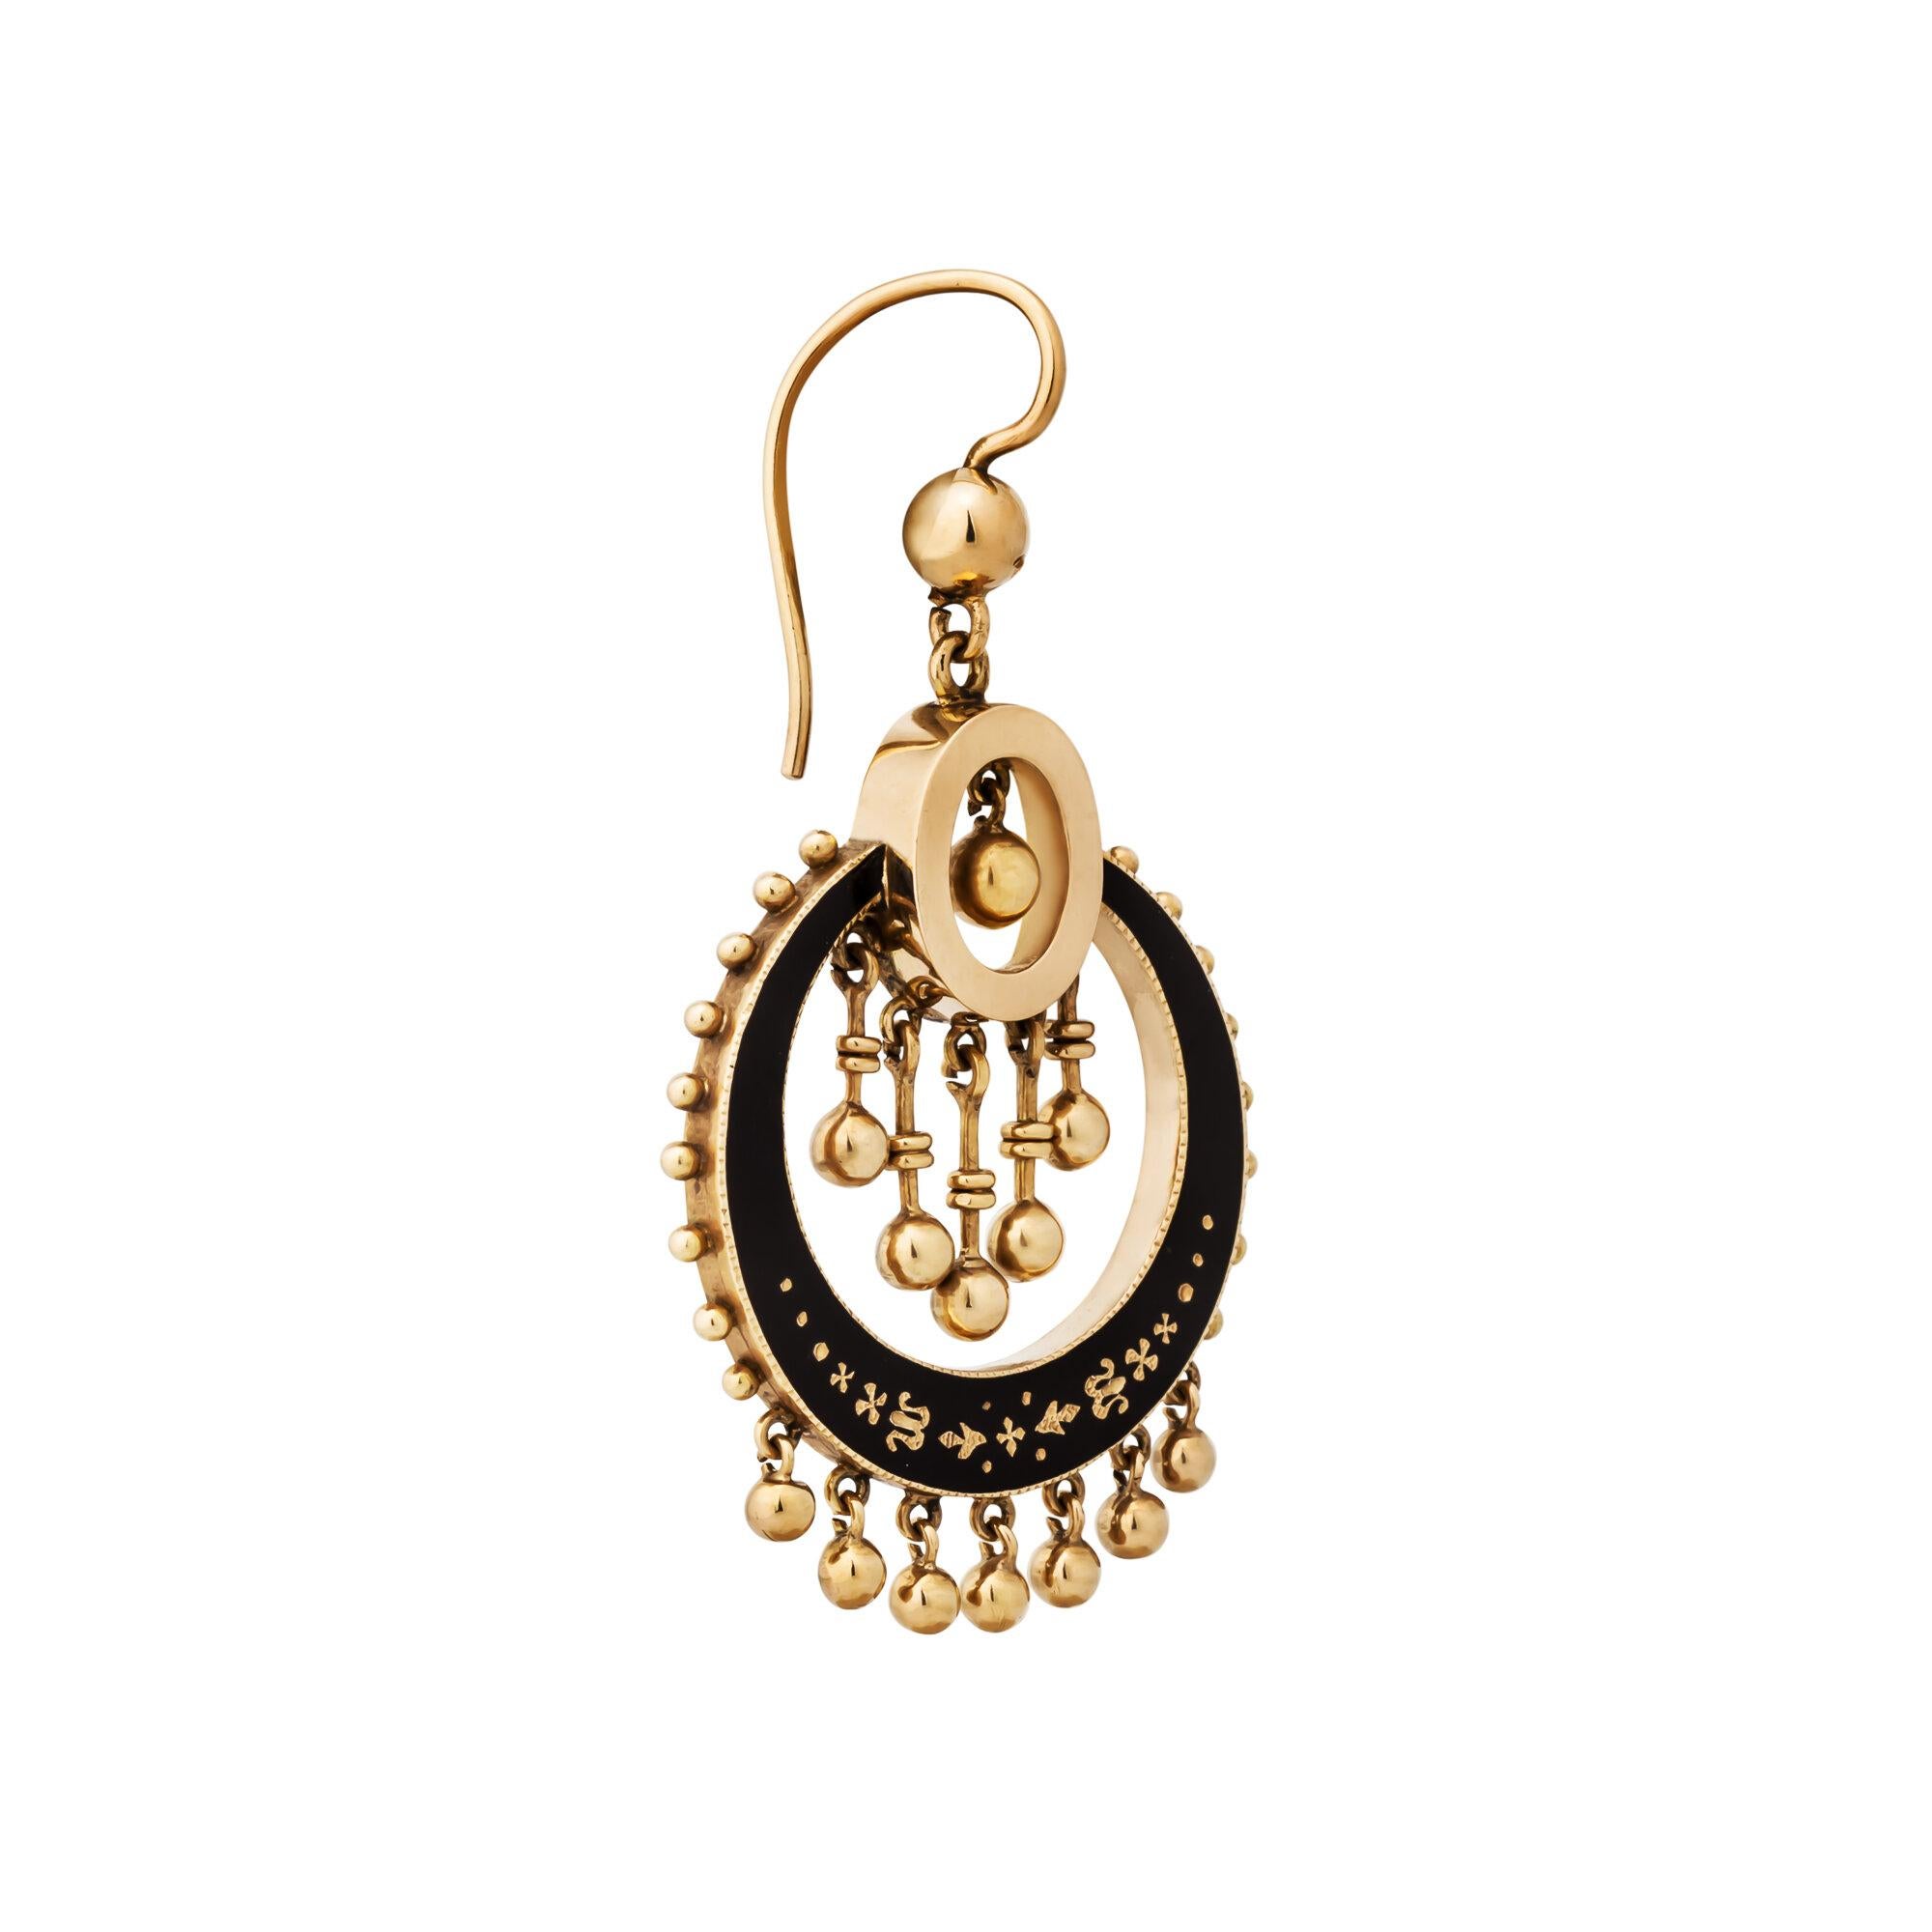 These Victorian gold and black enamel drop handmade earrings will dance 24/7 on anyone's ears.  With a series of hanging spheres that move gracefully, these circular two dimensional drop earrings will never stand still.  Circa 1875-1890.  14 karat